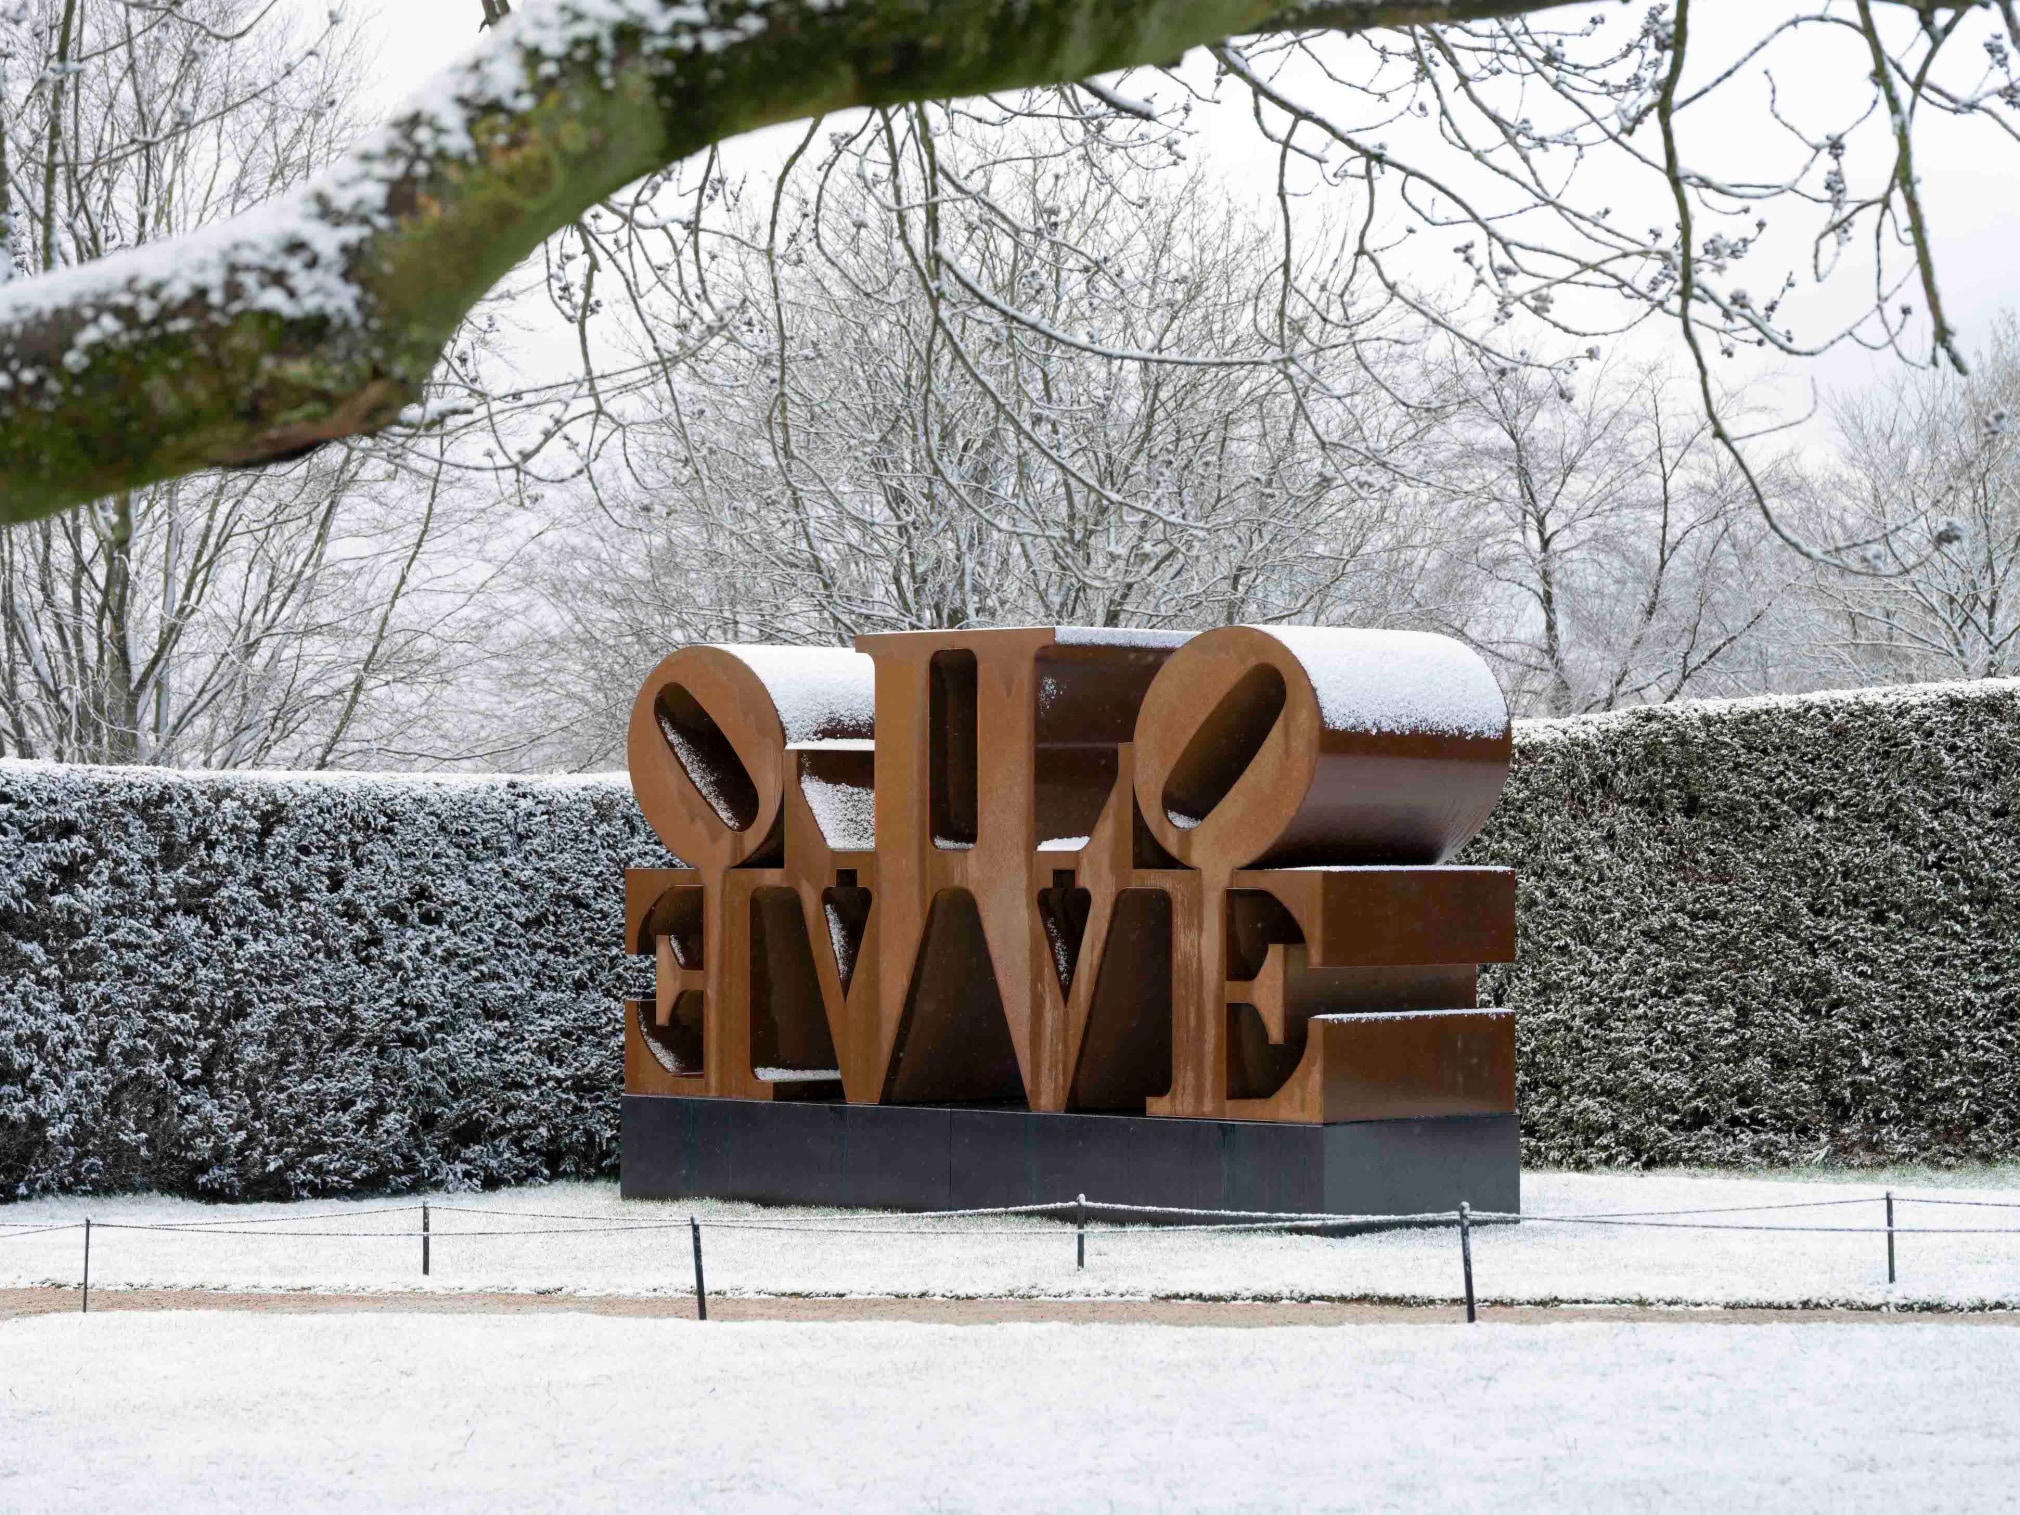 Imperial LOVE (1966&ndash;2006), installation view, Robert Indiana: Sculpture 1958-2018, Yorkshire Sculpture Park, March 12, 2022&ndash;January 8, 2023. Photo: &copy; Jonty Wilde, courtesy of Yorkshire Sculpture Park. Artwork: &copy; 2022 Morgan Art Foundation Ltd./ Artists Rights Society (ARS), New York/DACS, London